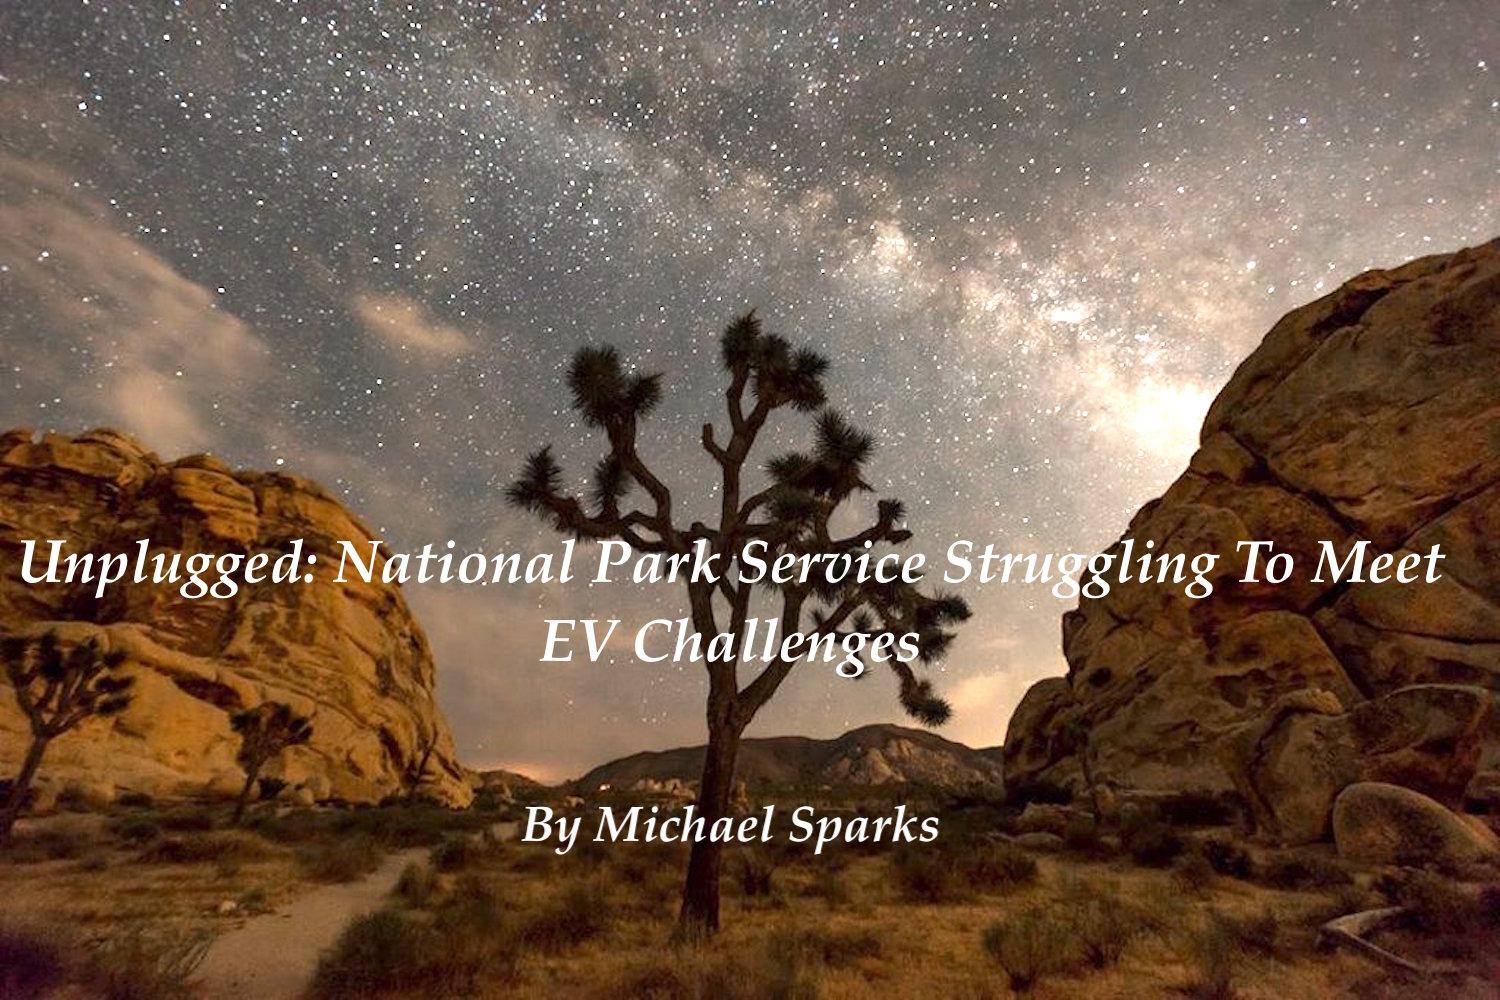 NPS faces great challenges installing EV stations in national parks.